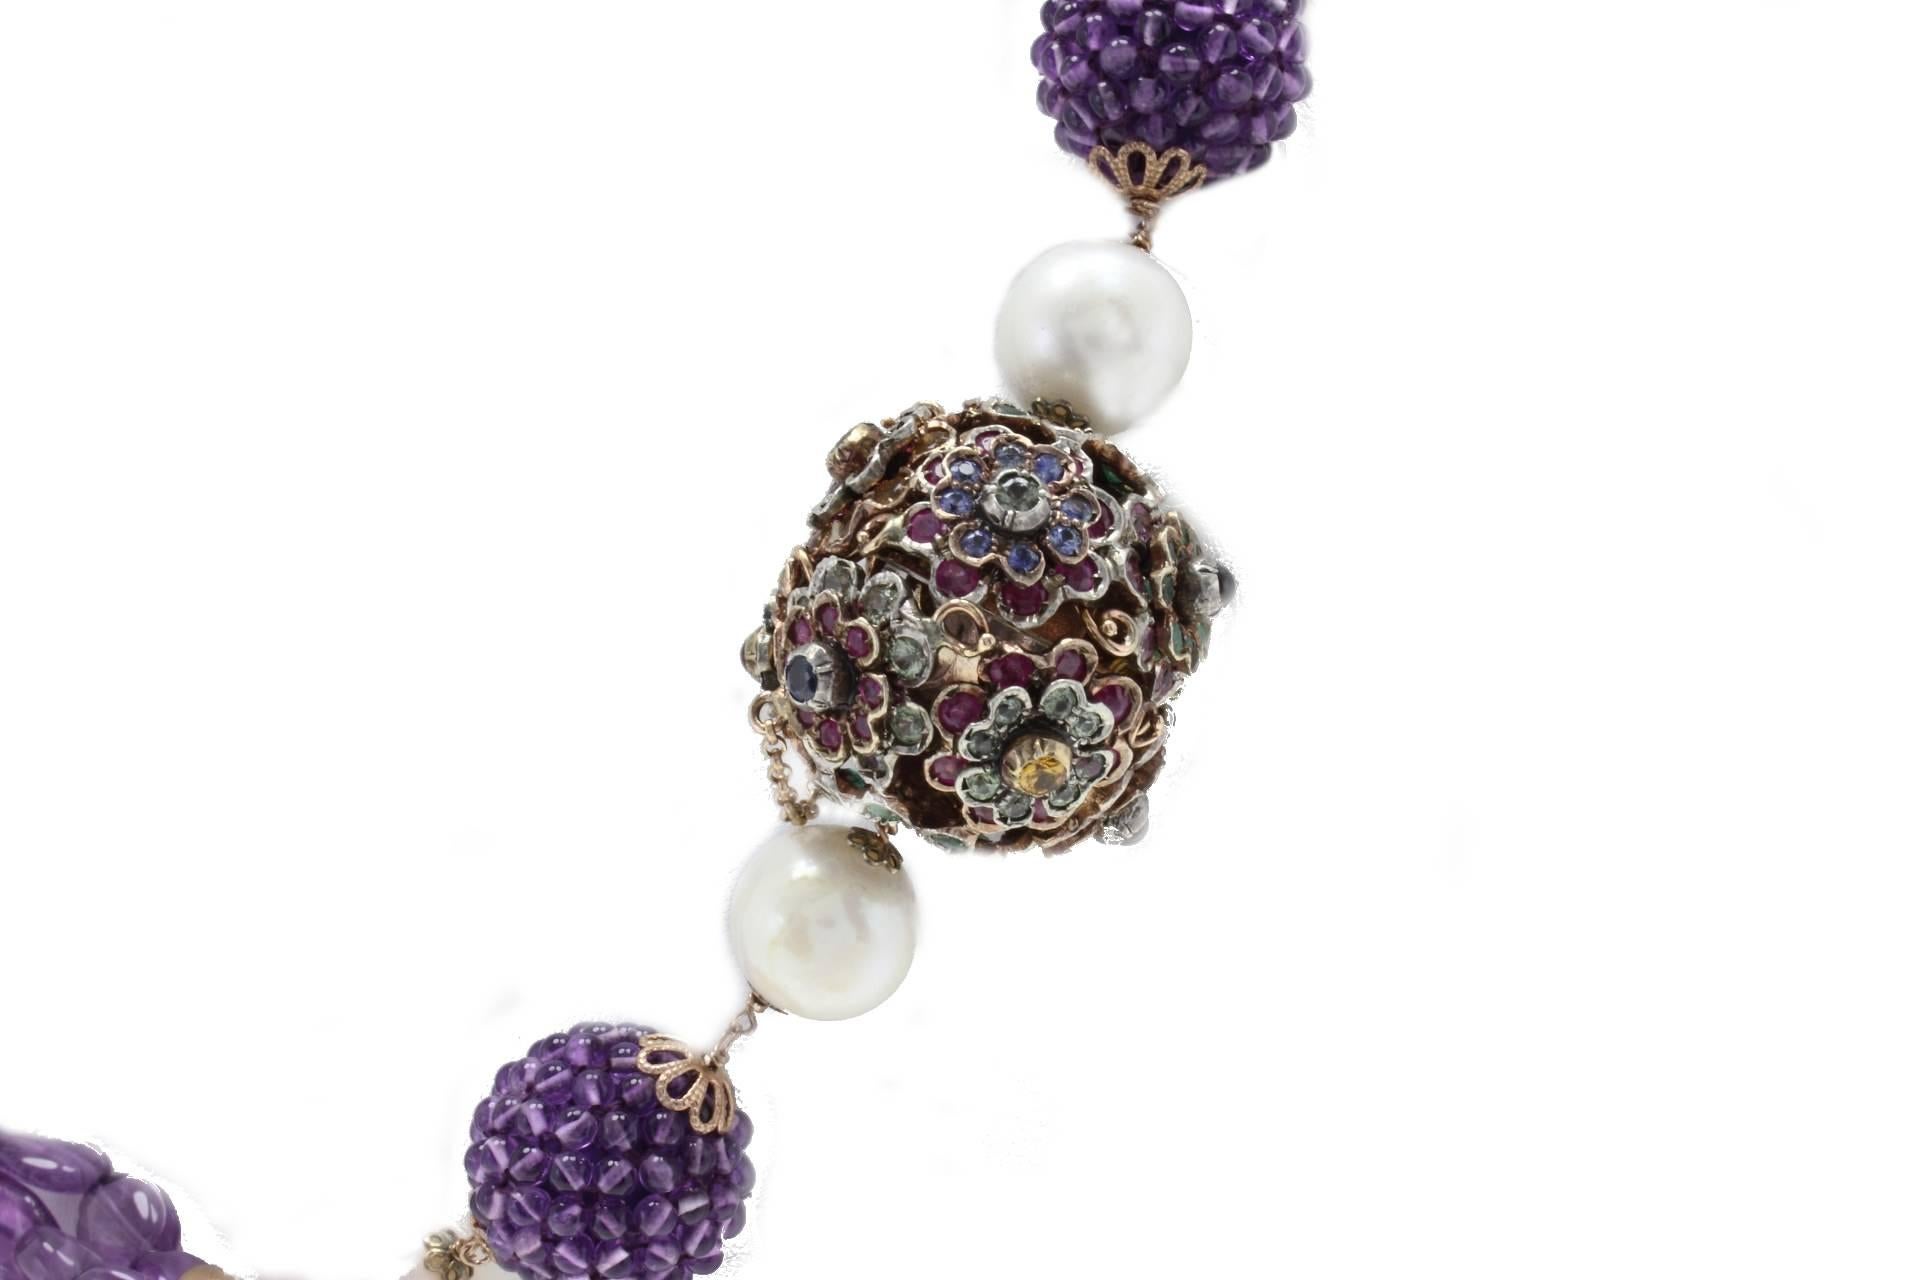 Multi-Strand Necklace composed of 5 amethyst rows, pearls, amethysts and gold and silver clasp mounted with emeralds, rubies and multicolor sapphires.
Rubies, Multicolor Sapphires,Emeralds 14.87 kt
Amethyst 115.87 gr
Pearls 12.20 gr
Tot.Weight